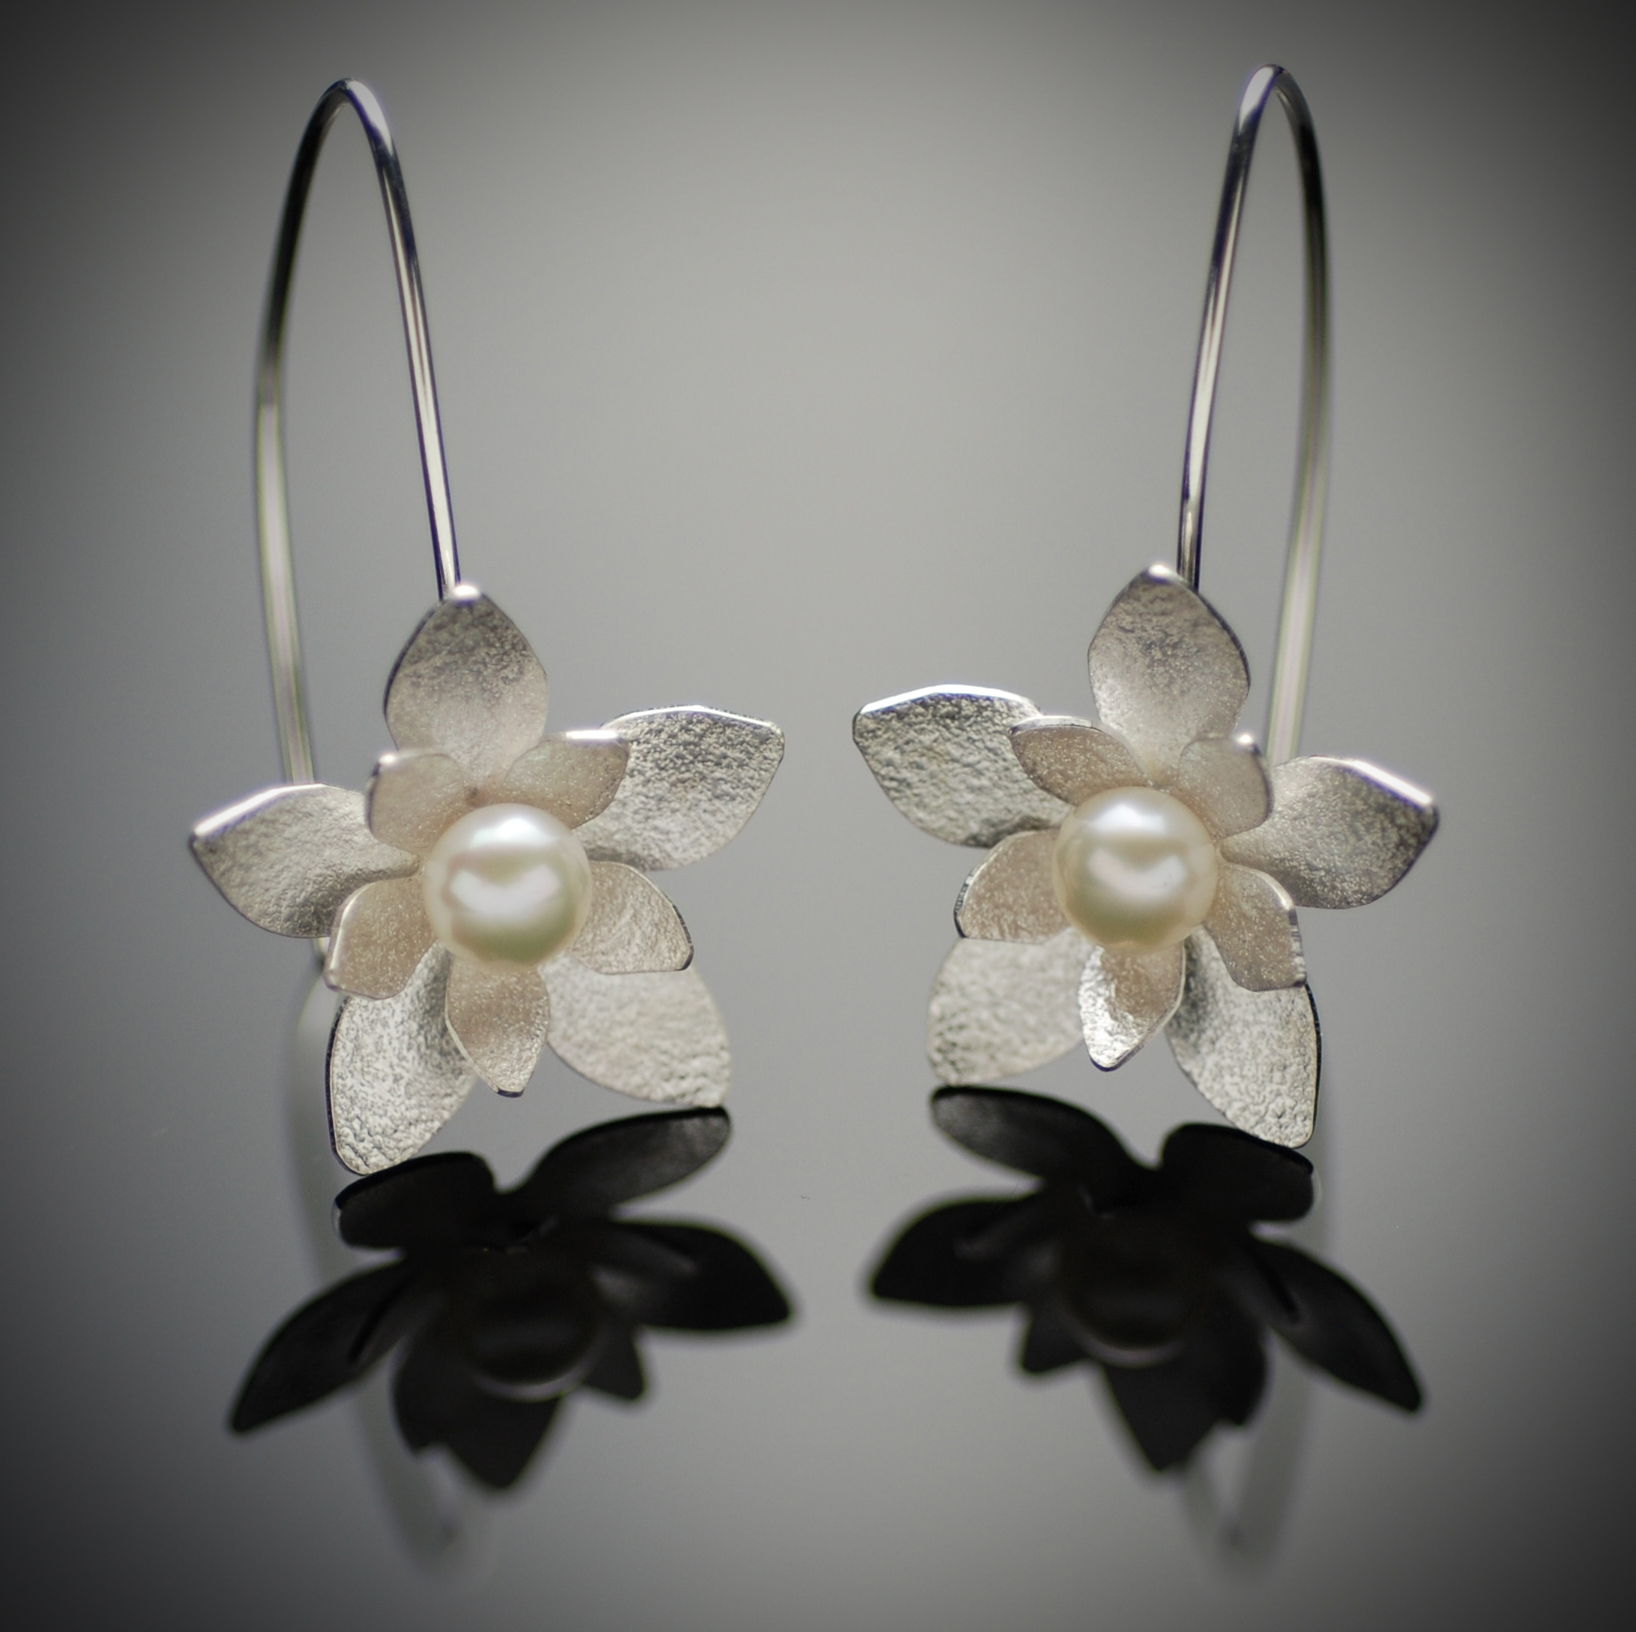 Large Silver Lotus Flower with Pearl Earrings | Centre Village Studio